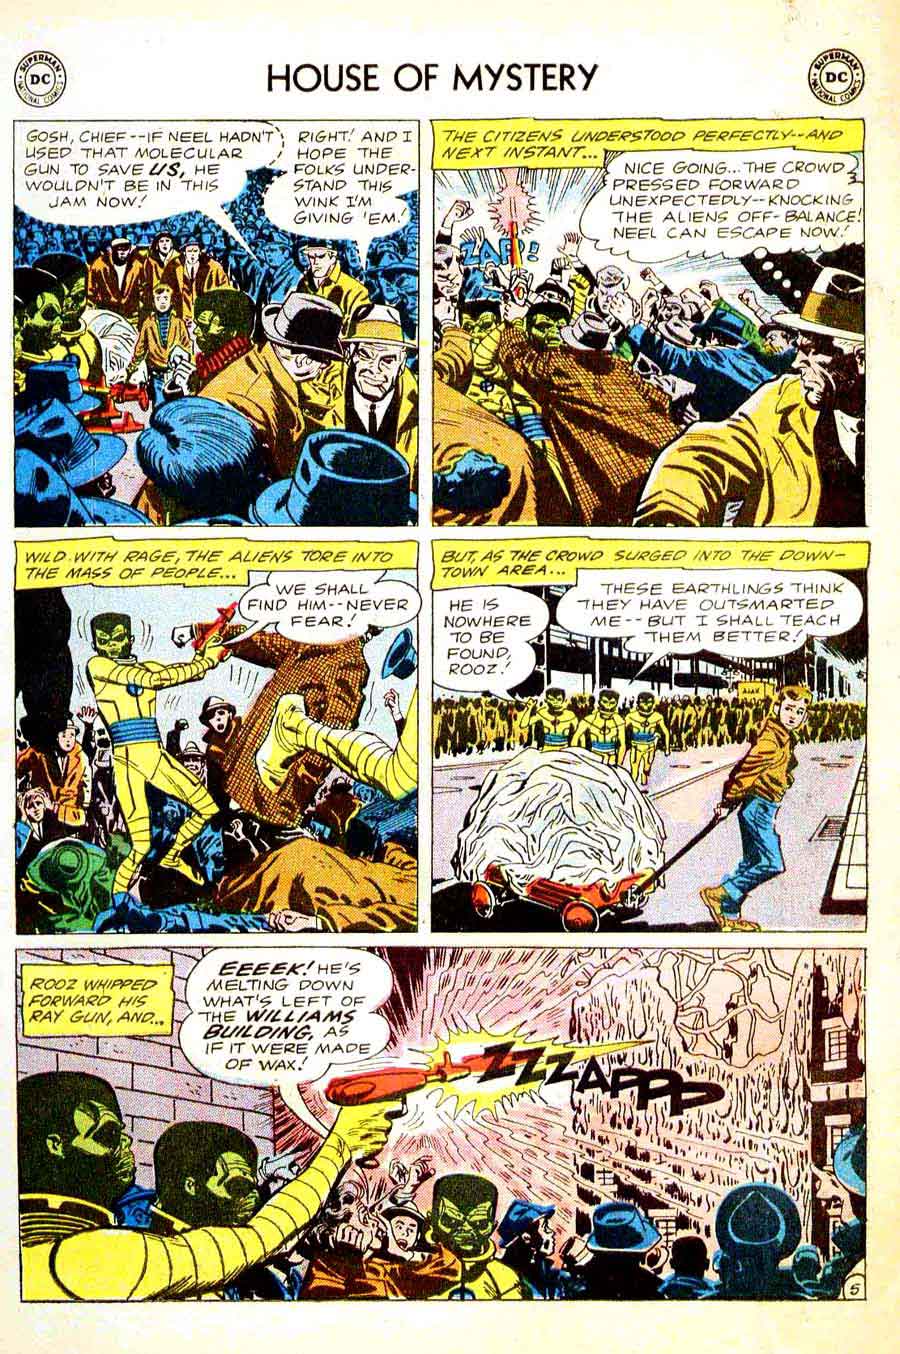 House of Mystery #120 silver age dc comic book page by alex toth